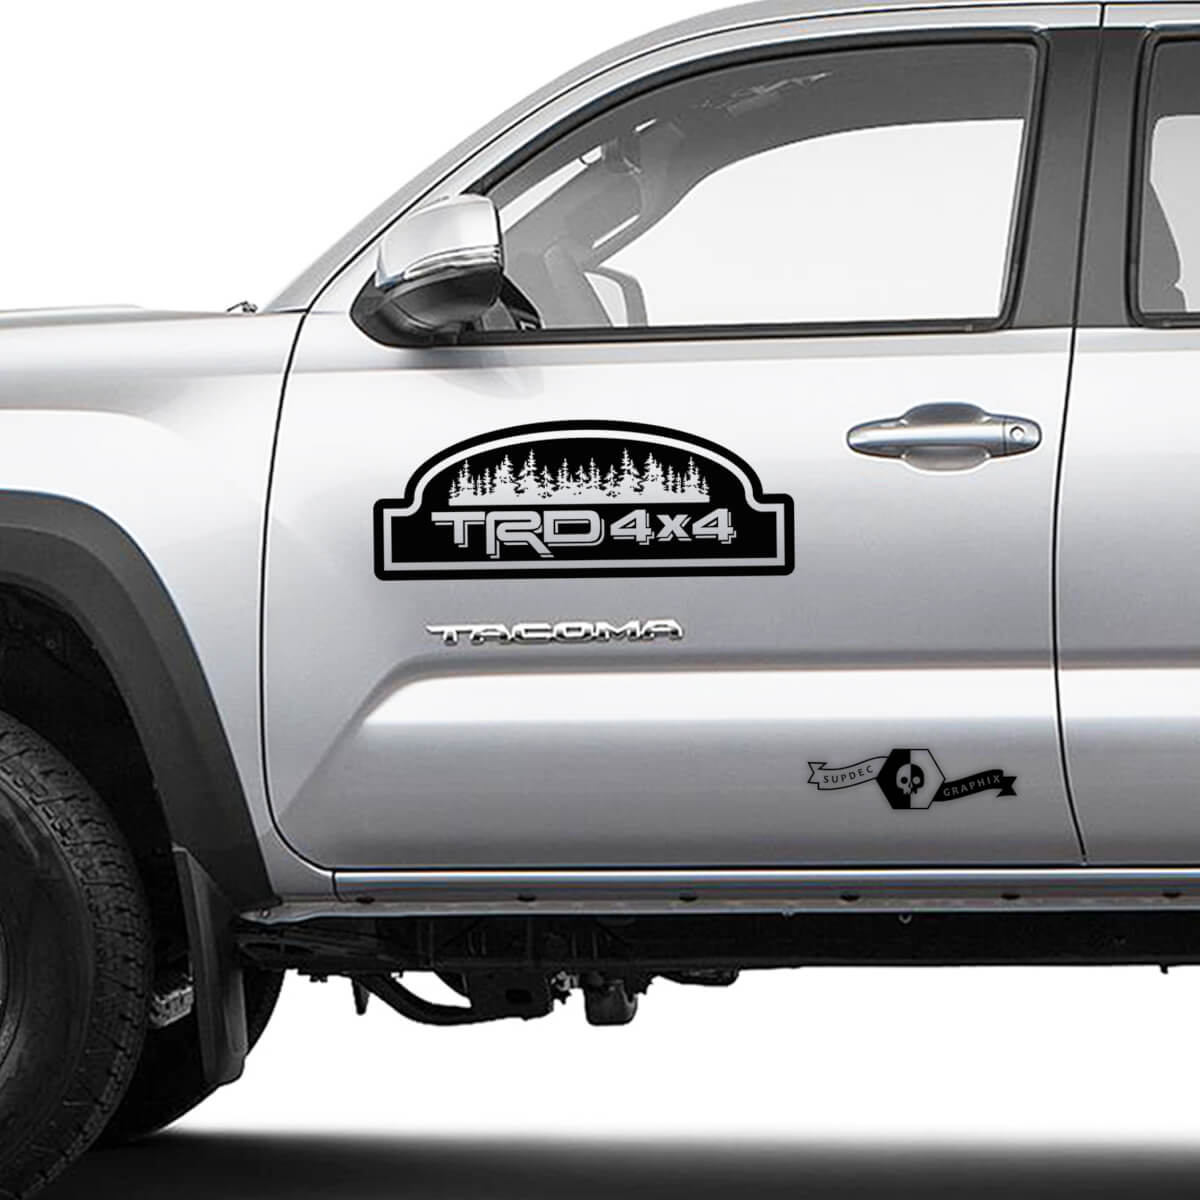 Toyota TRD OFFROAD Decal Set 2007 Tacoma Tundra Truck Vinyl Sticker black/red 